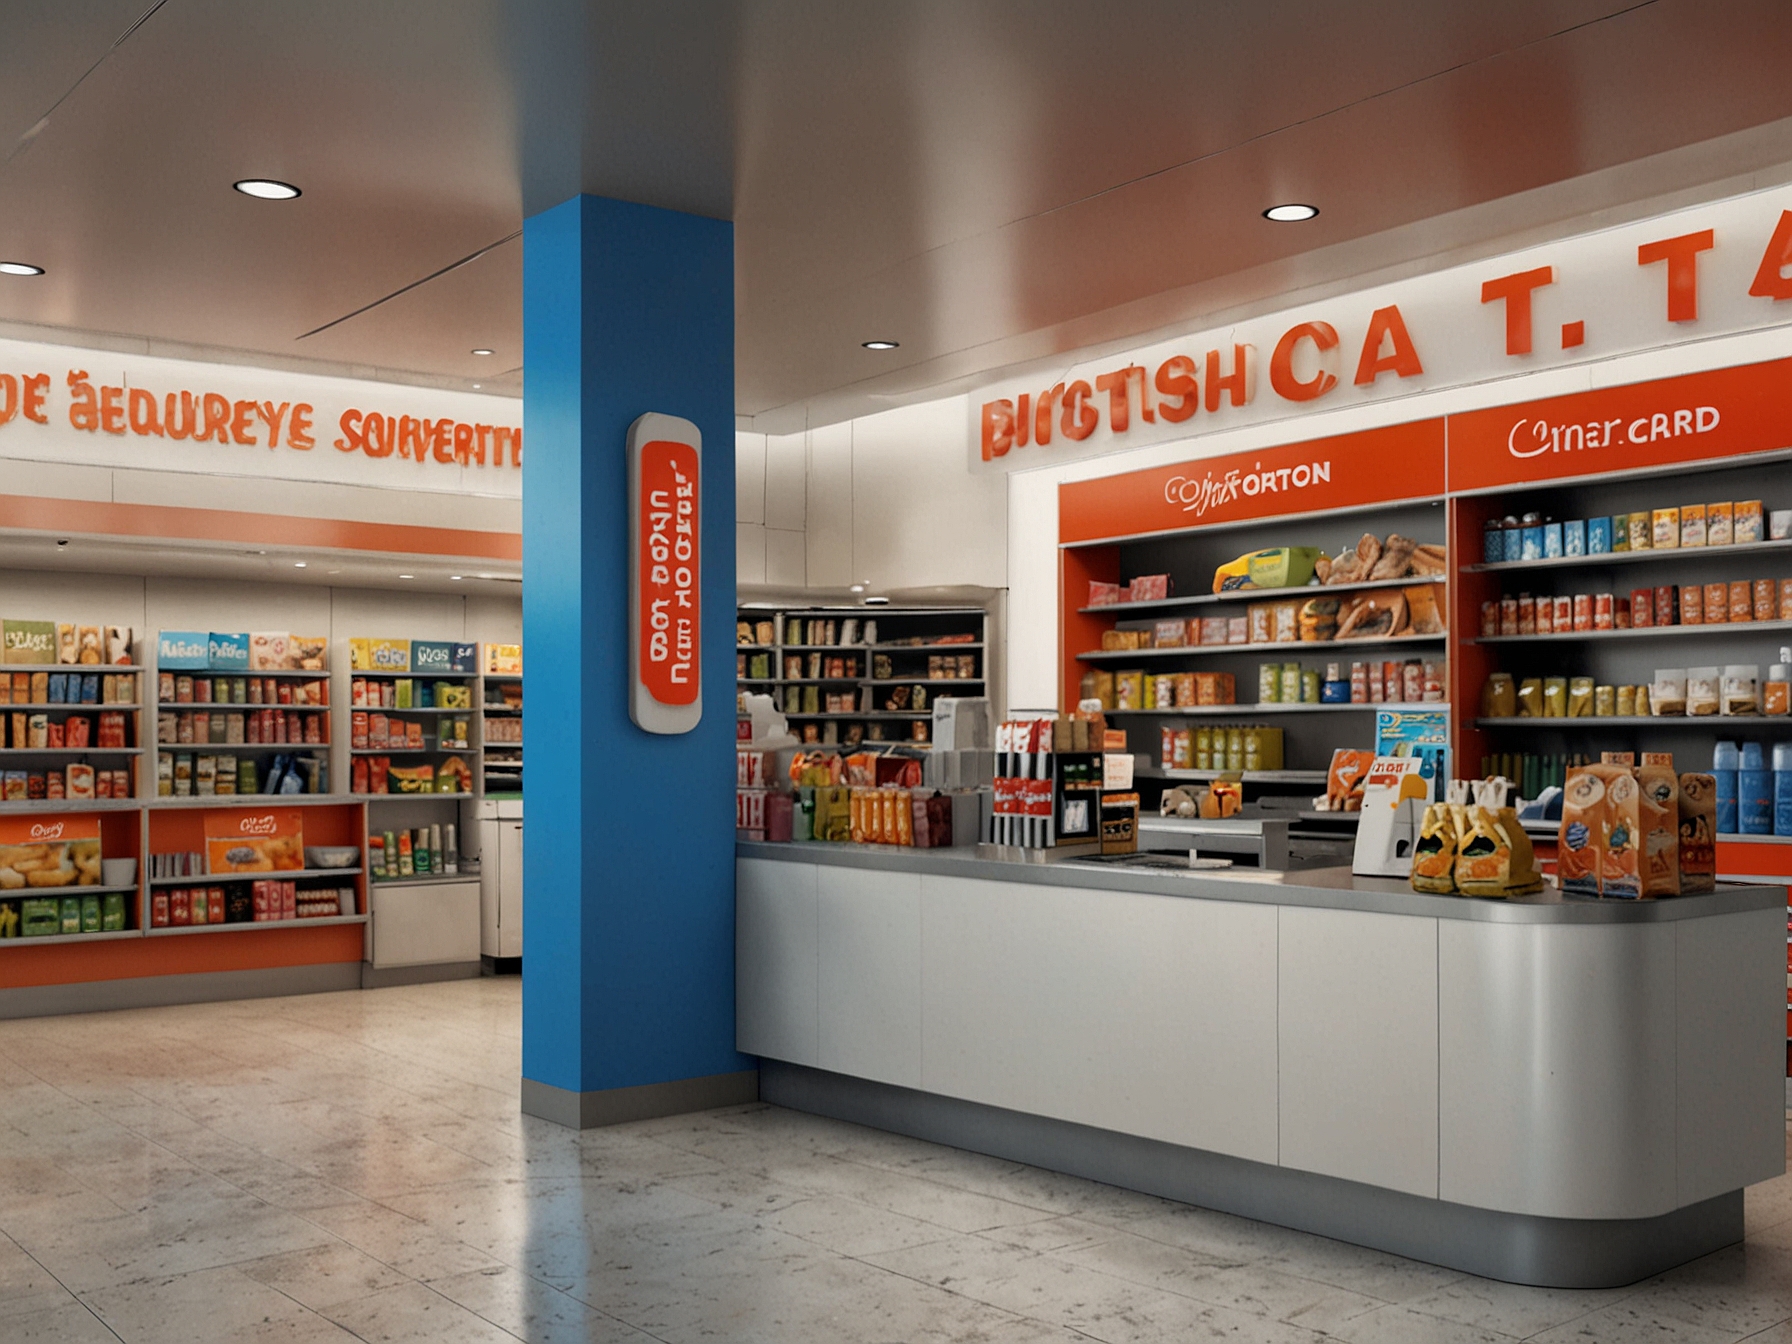 A bustling Alimentation Couche-Tard convenience store showcasing diverse product offerings and modern design, reflecting the company's expansive global footprint and operational efficiency.